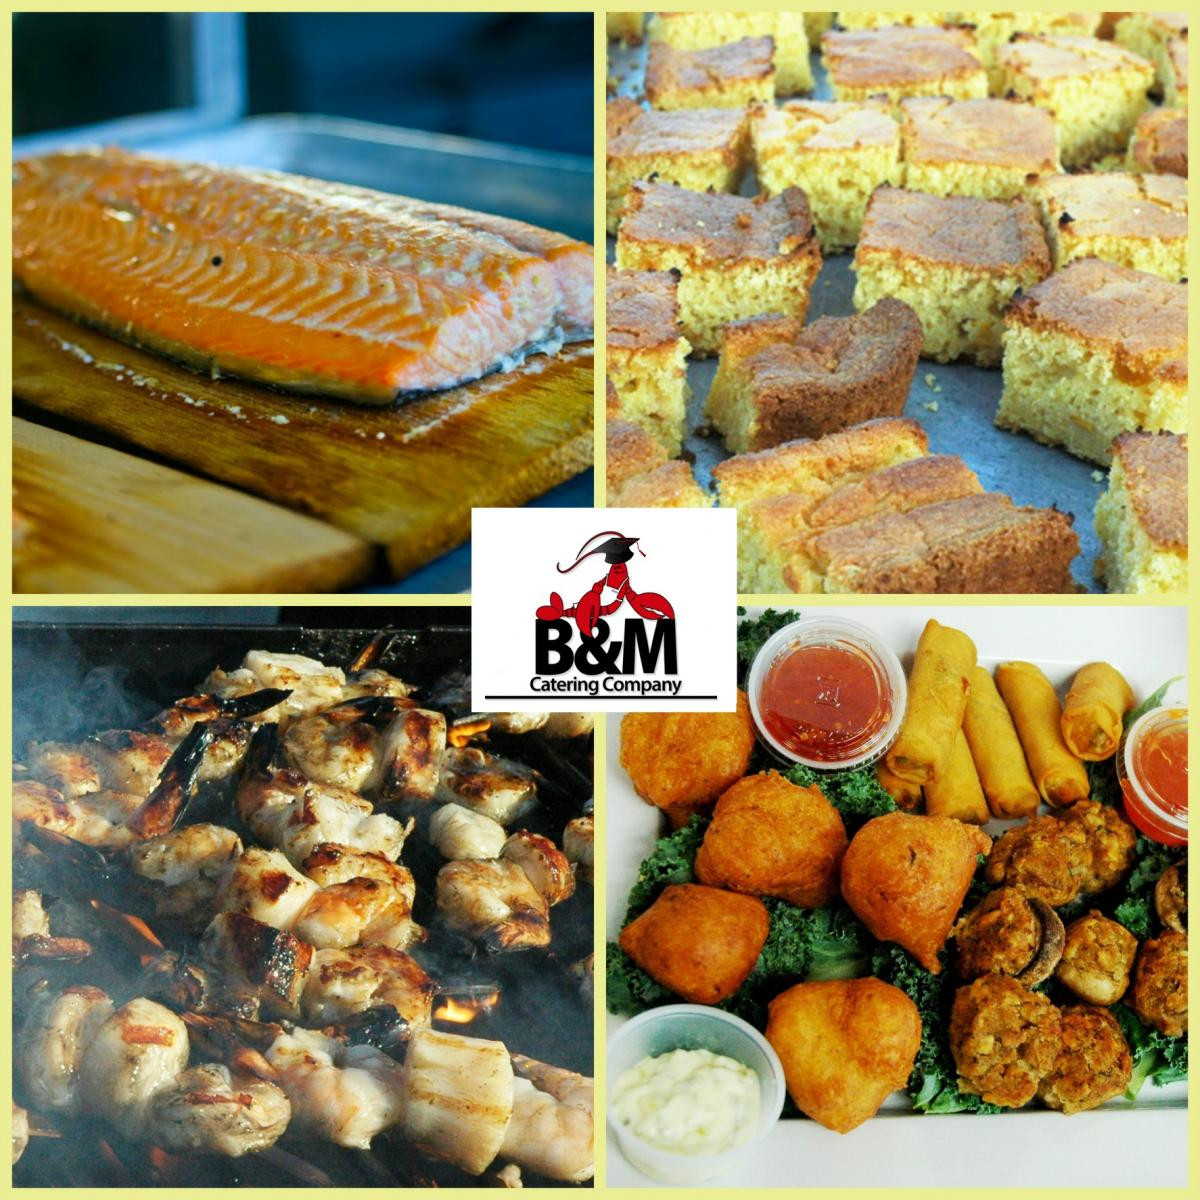 Graduation Party Catering Ideas
 Graduation Parties Made Easy with B&M Catering